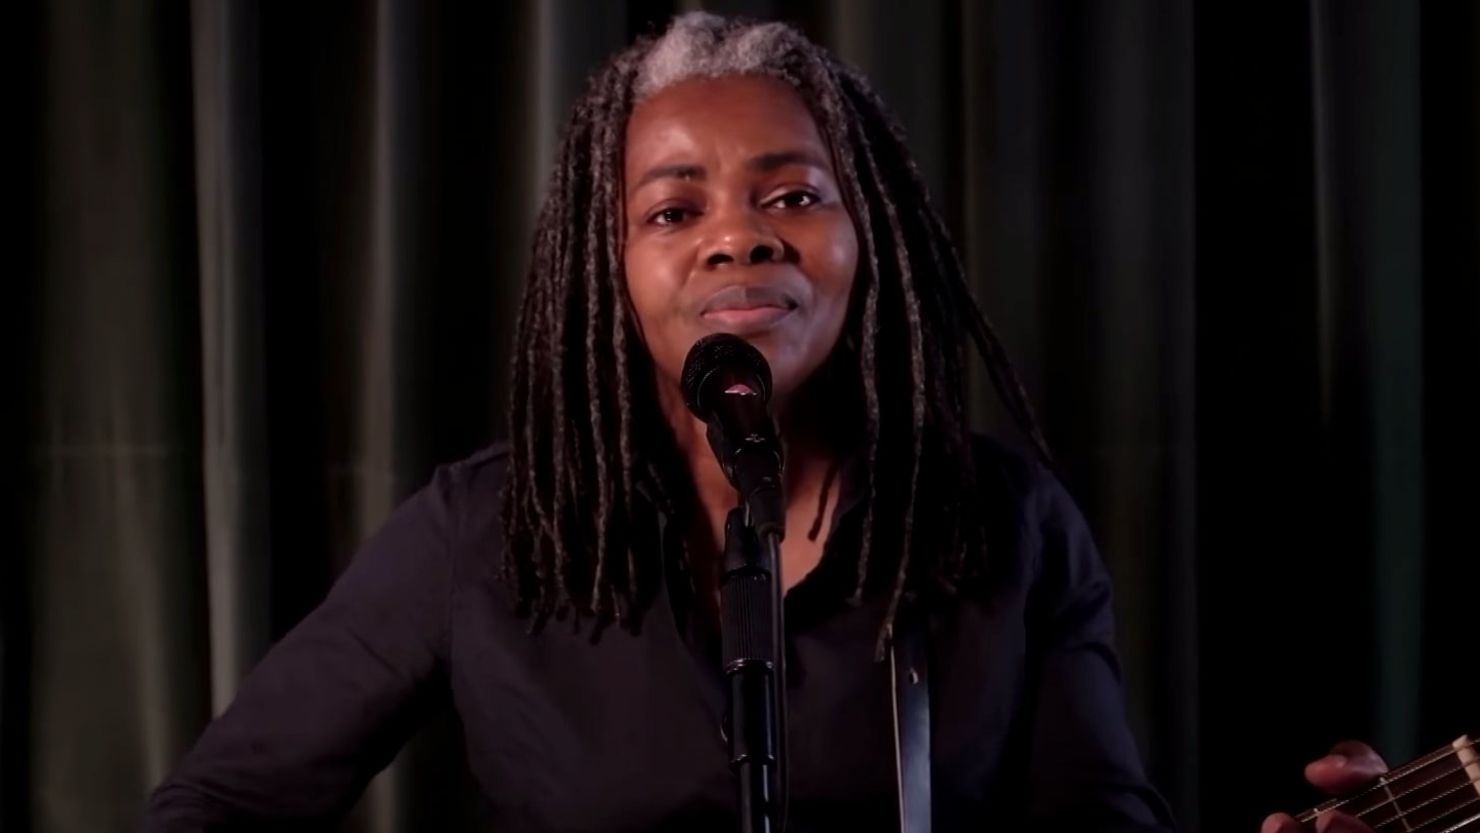 Tracy Chapman gave an acoustic performance on "Late Night with Seth Meyers."